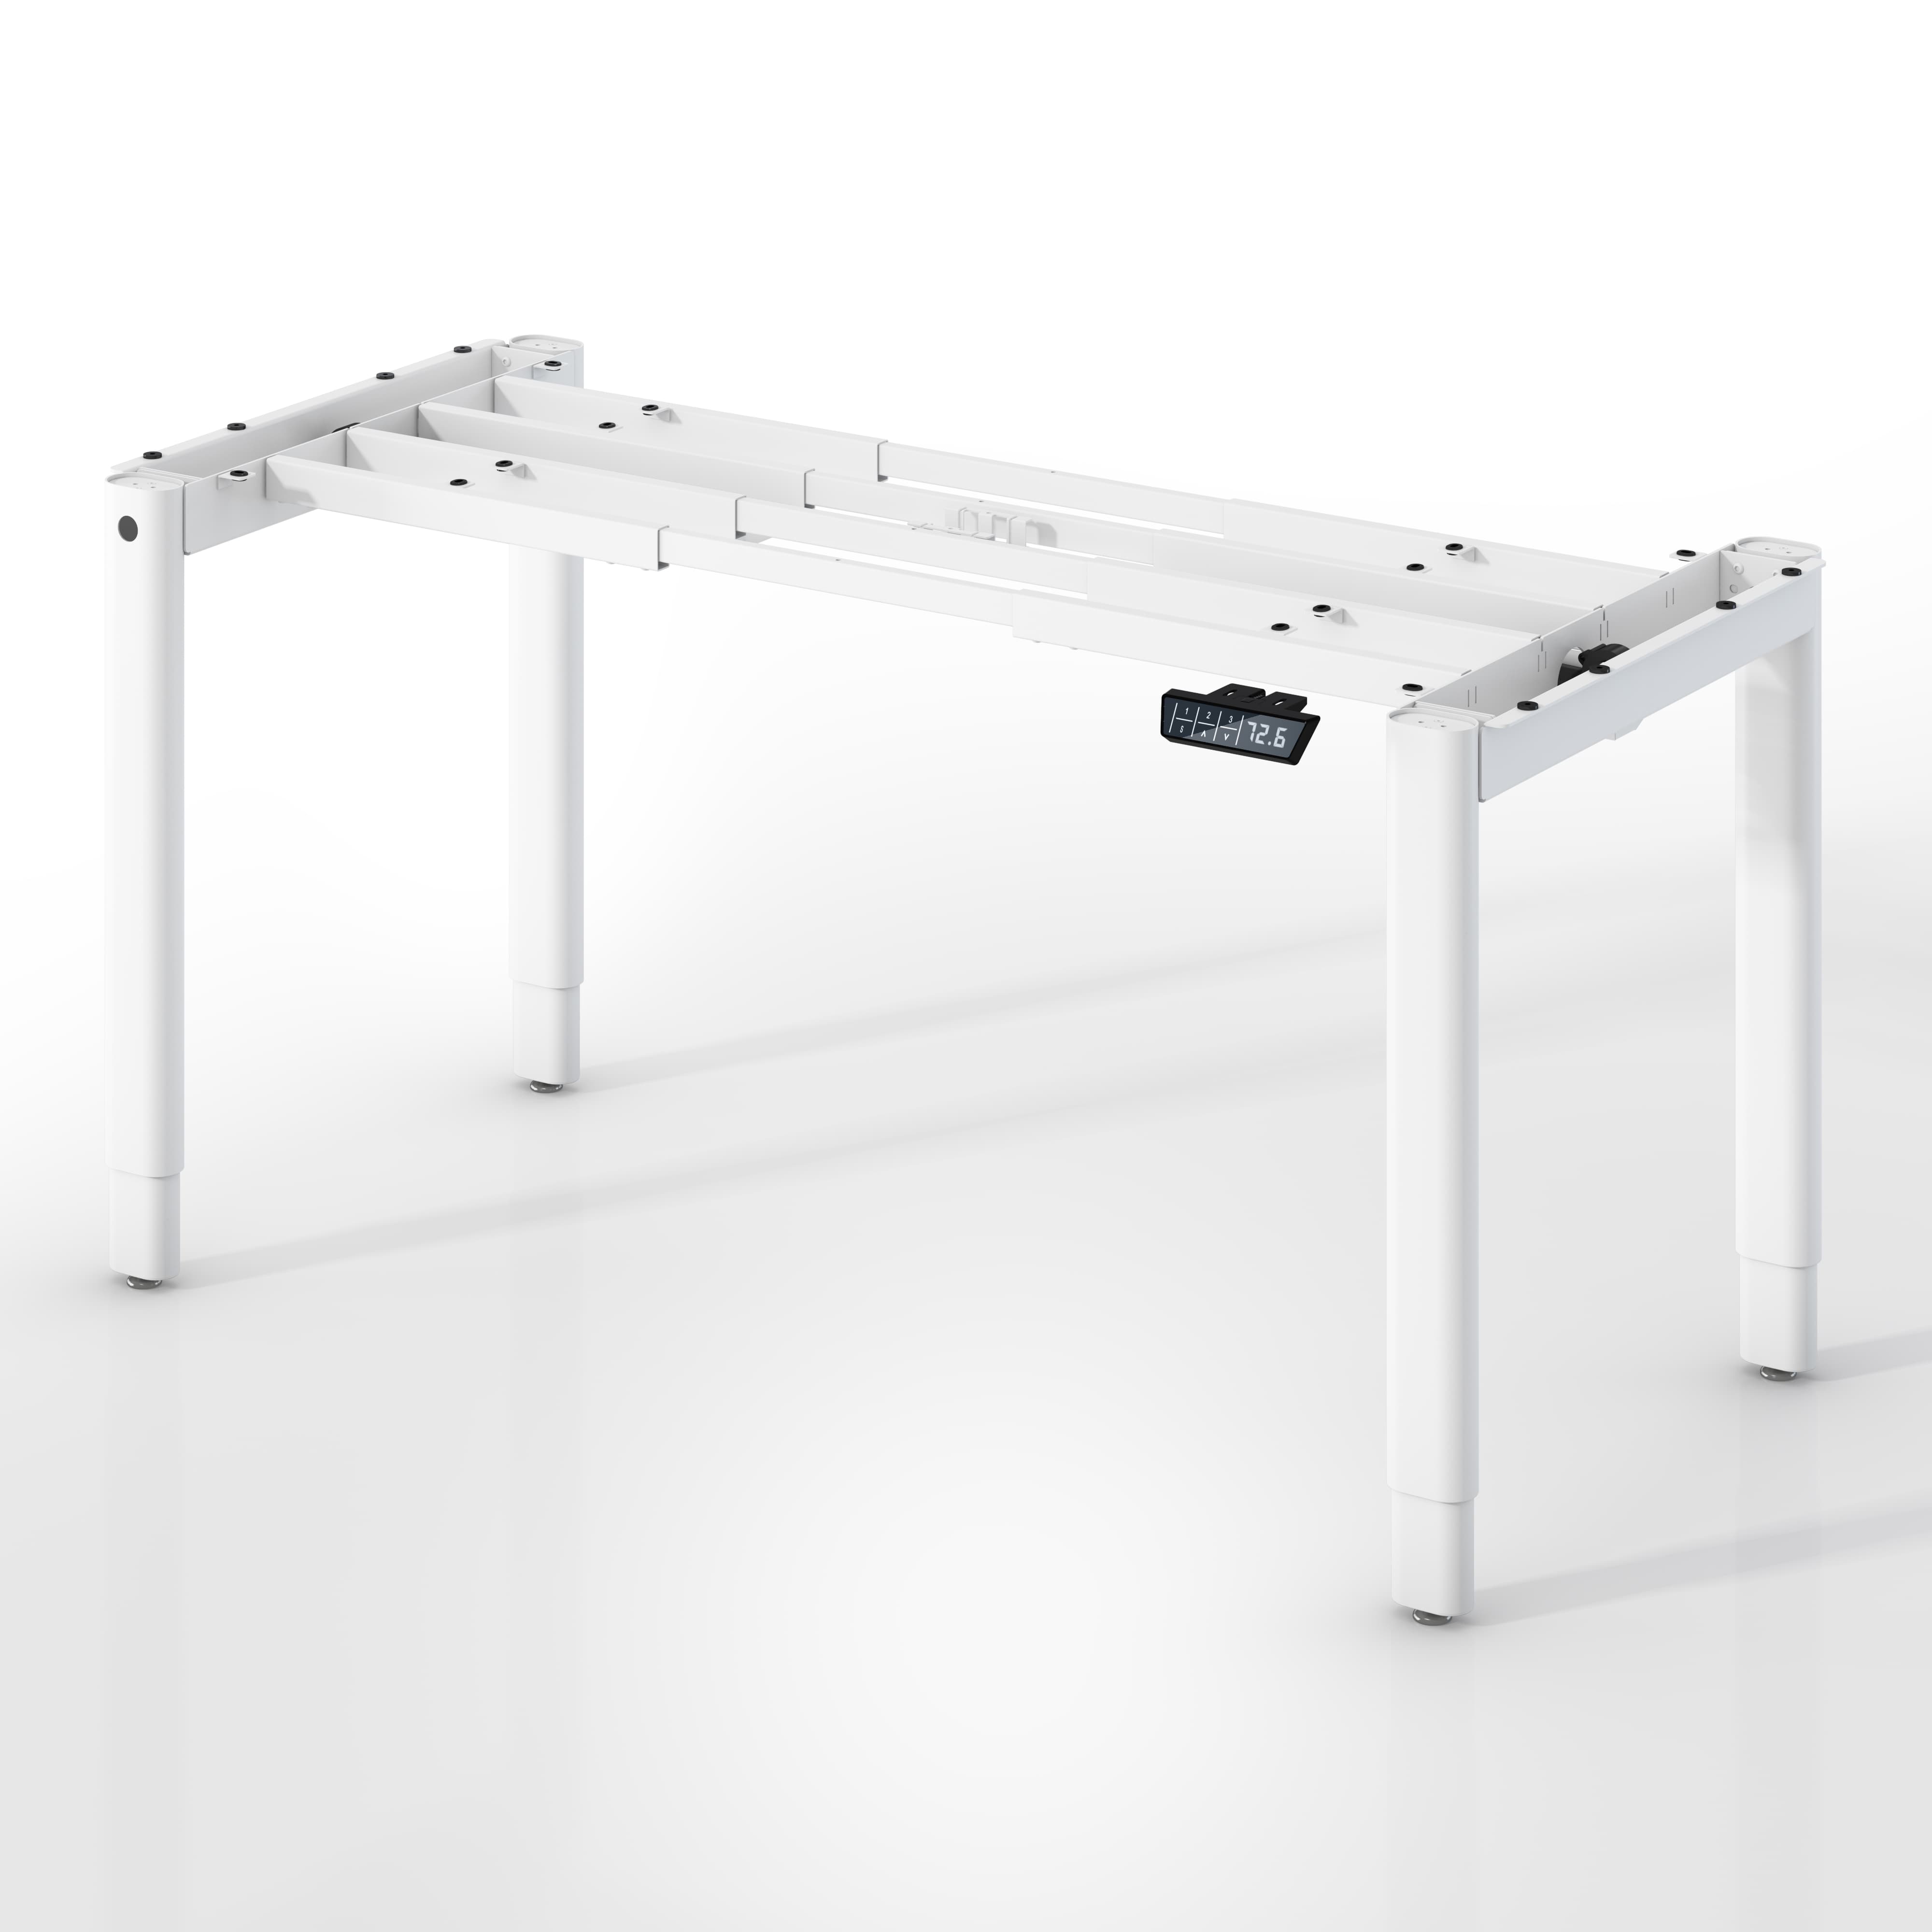 Maidesite T4 Pro Plus - 4 Leg Electric Stand Up Desk Frame